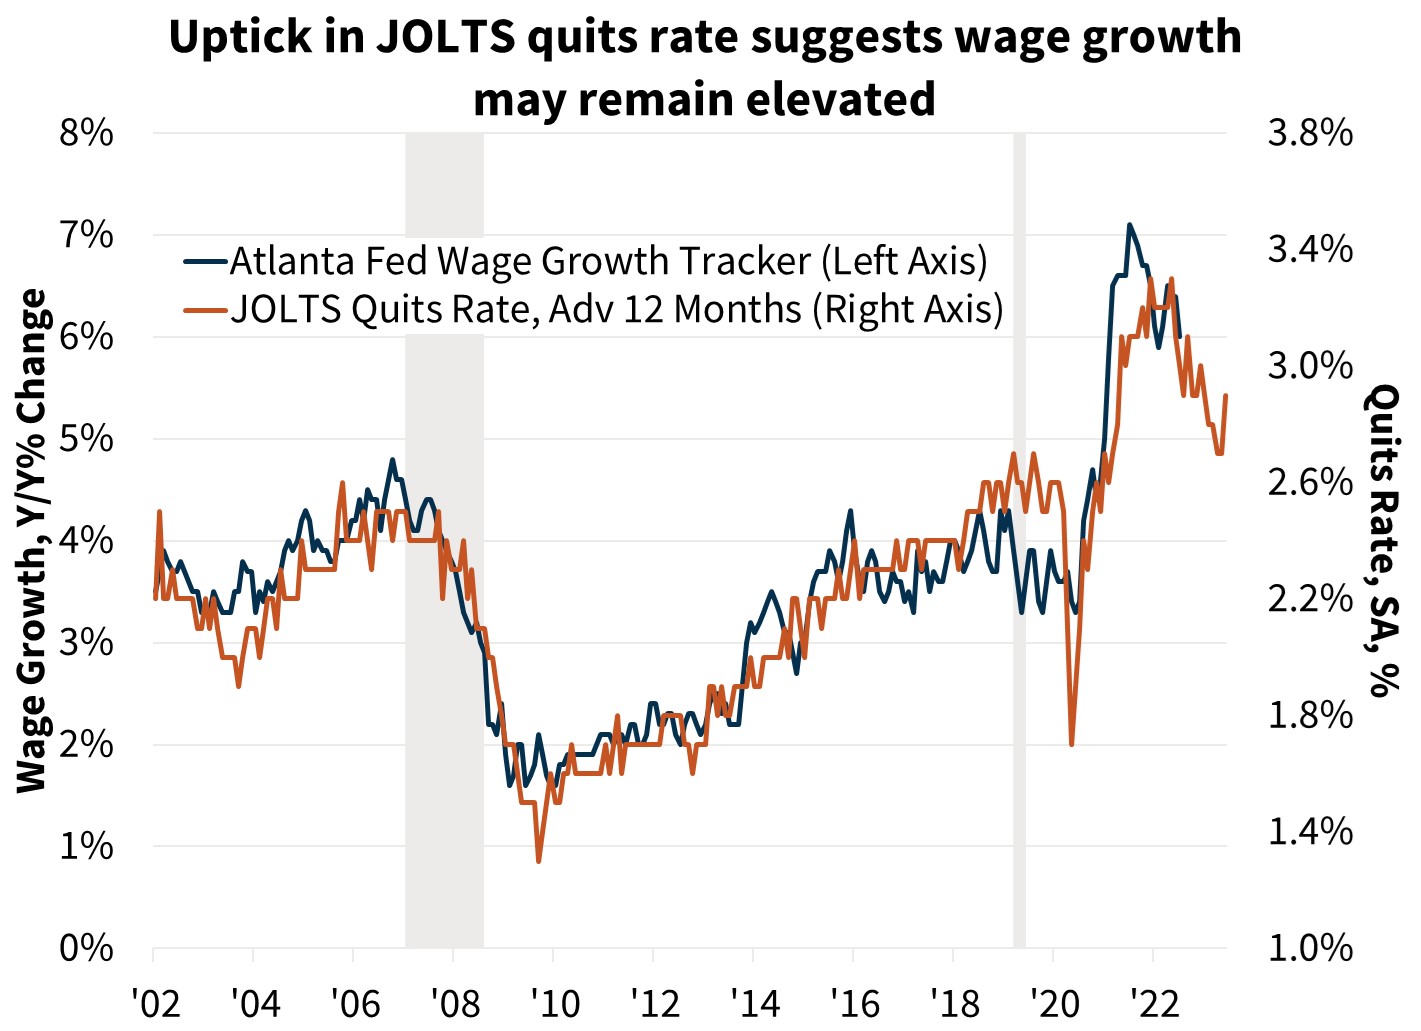 Uptick in jolts quits rate suggests wage growth may remain elevated